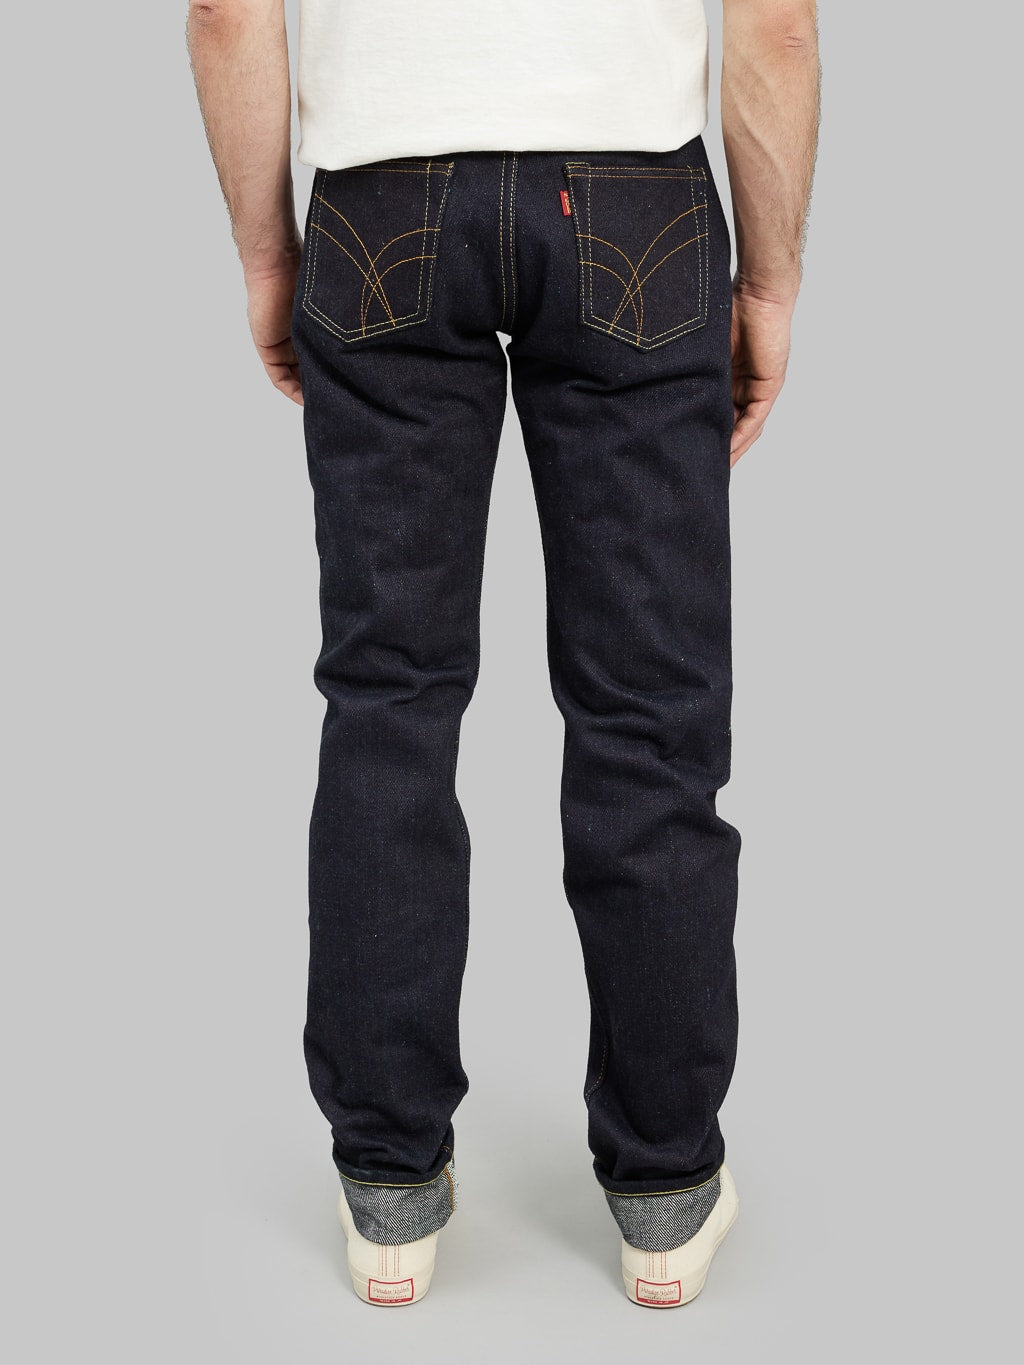 The Strike Gold Extra Heavyweight straight tapered jeans back rise